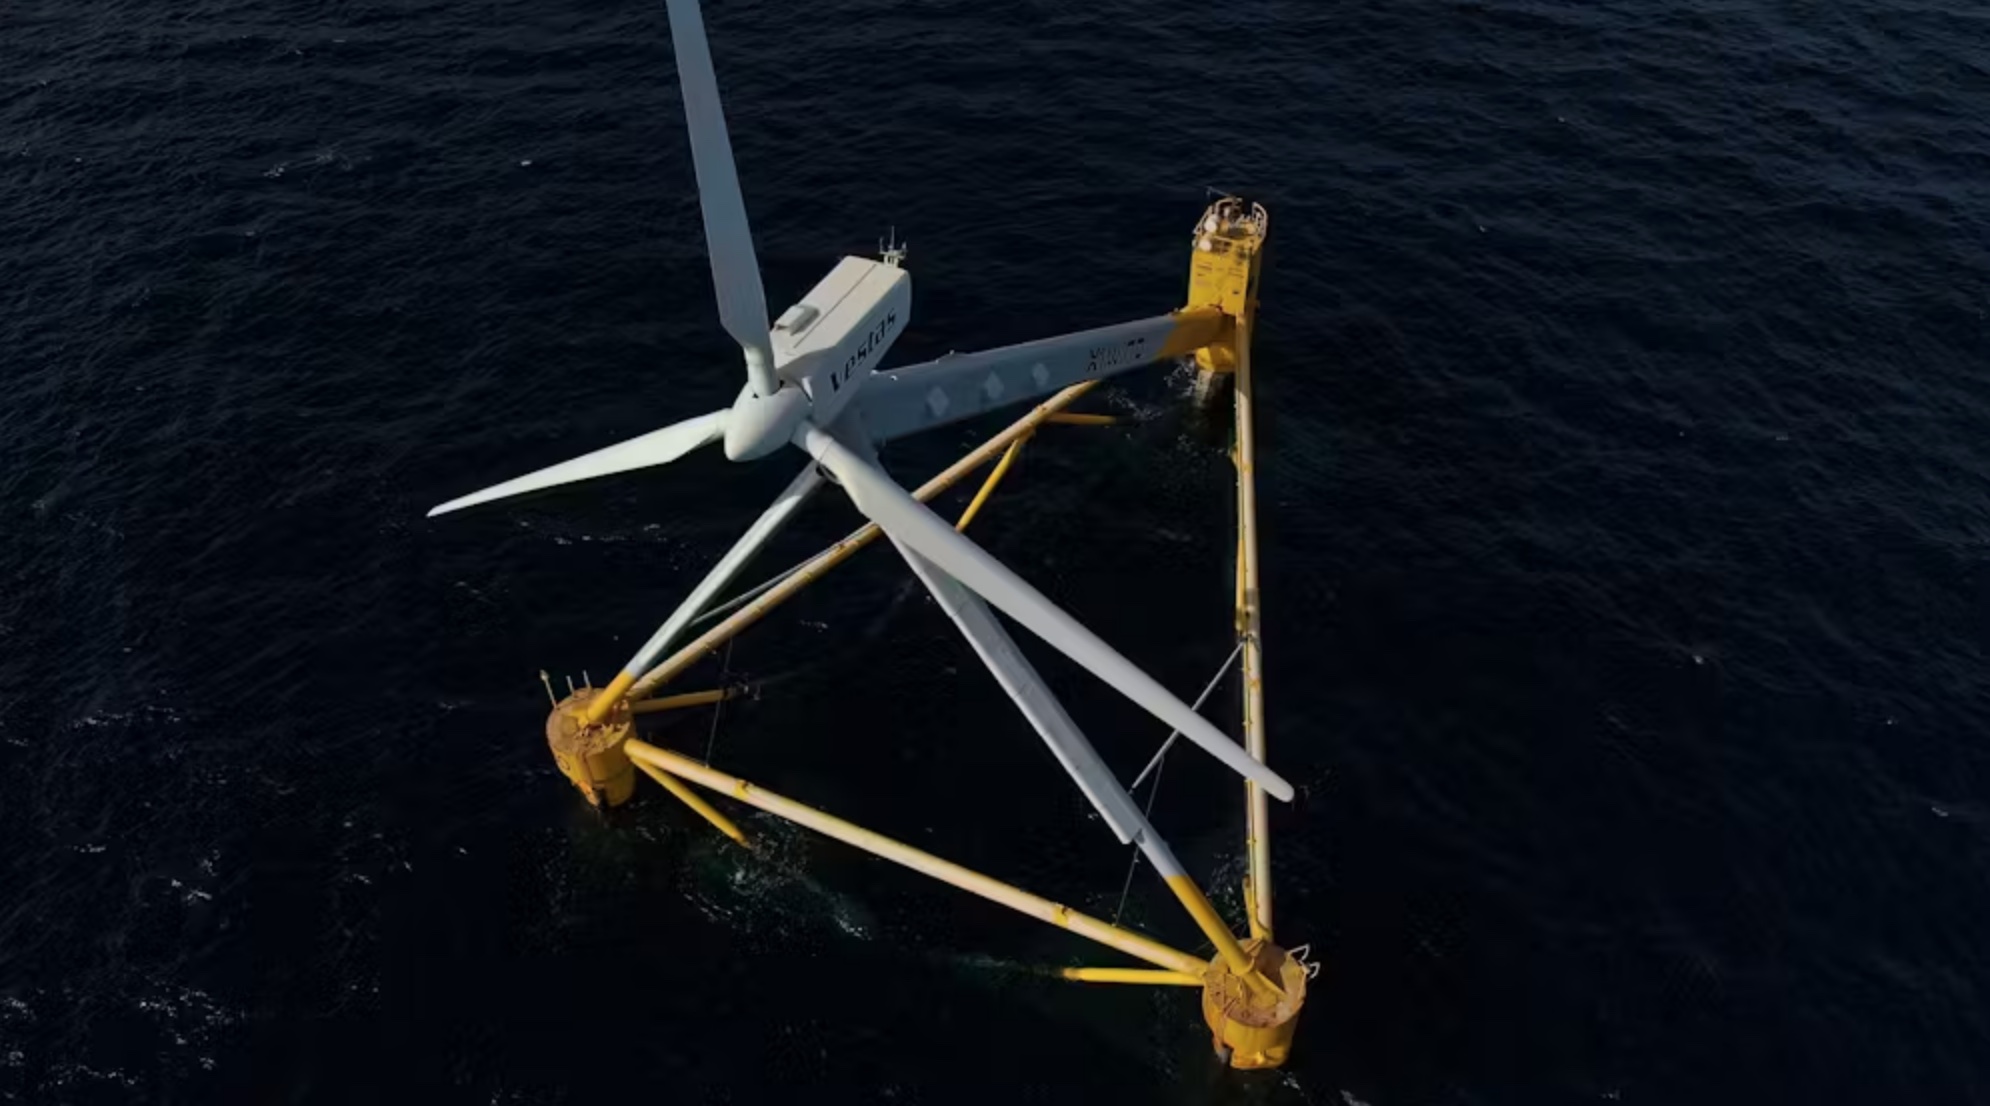 Aerial view of an offshore wind turbine with a white and yellow base standing in deep blue sea waters.